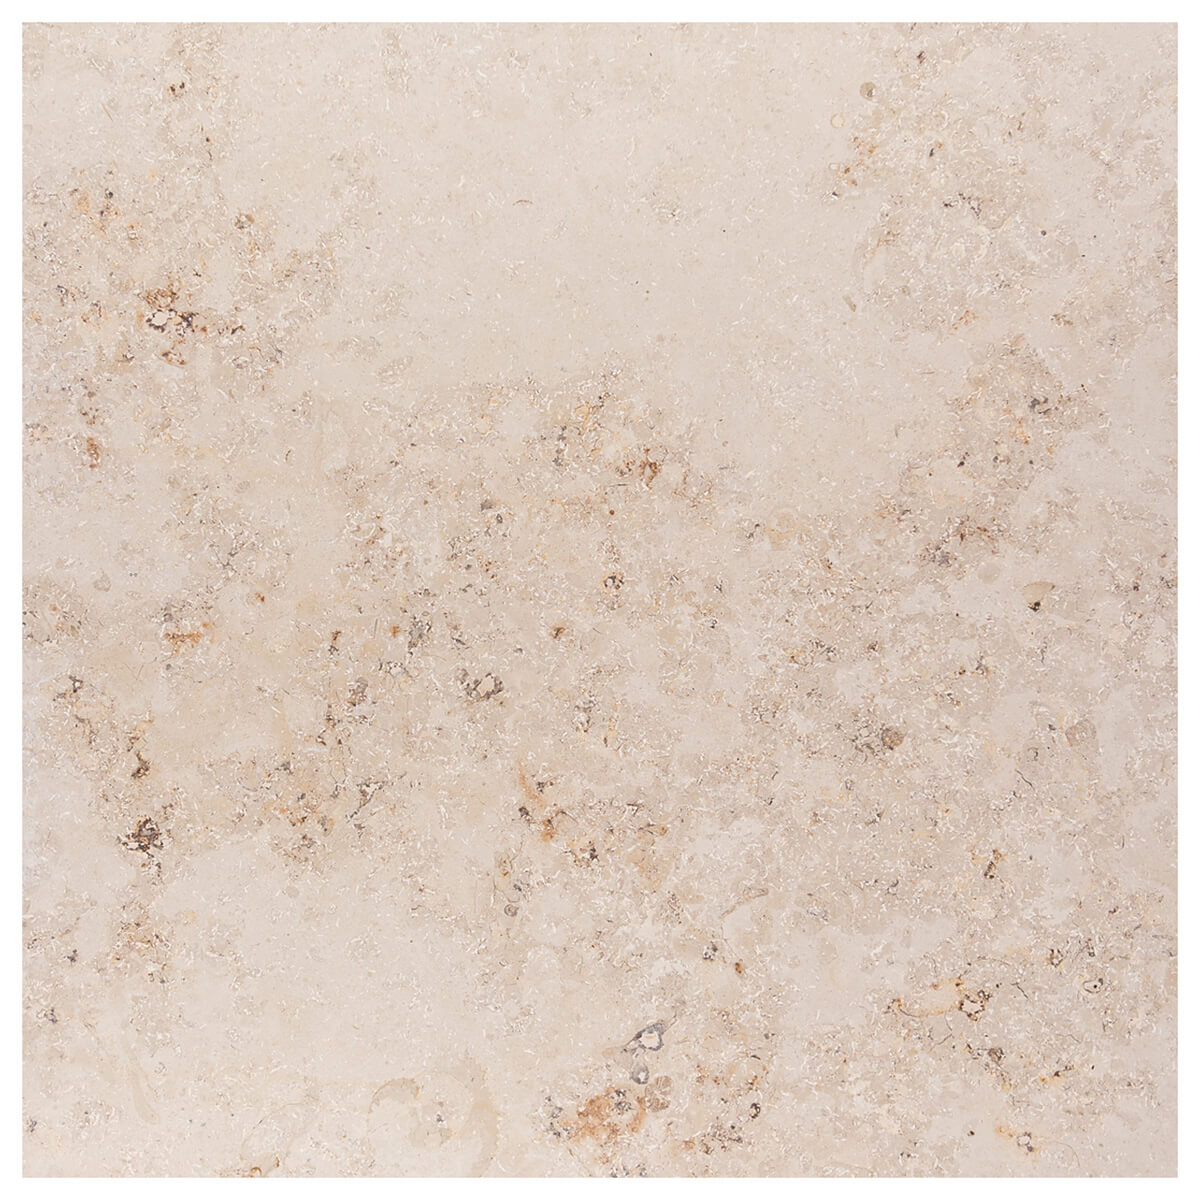 Jura Beige limestone tile 18x18 honed finish straight edges versatile design element for flooring wall cladding countertops commercial and residential use